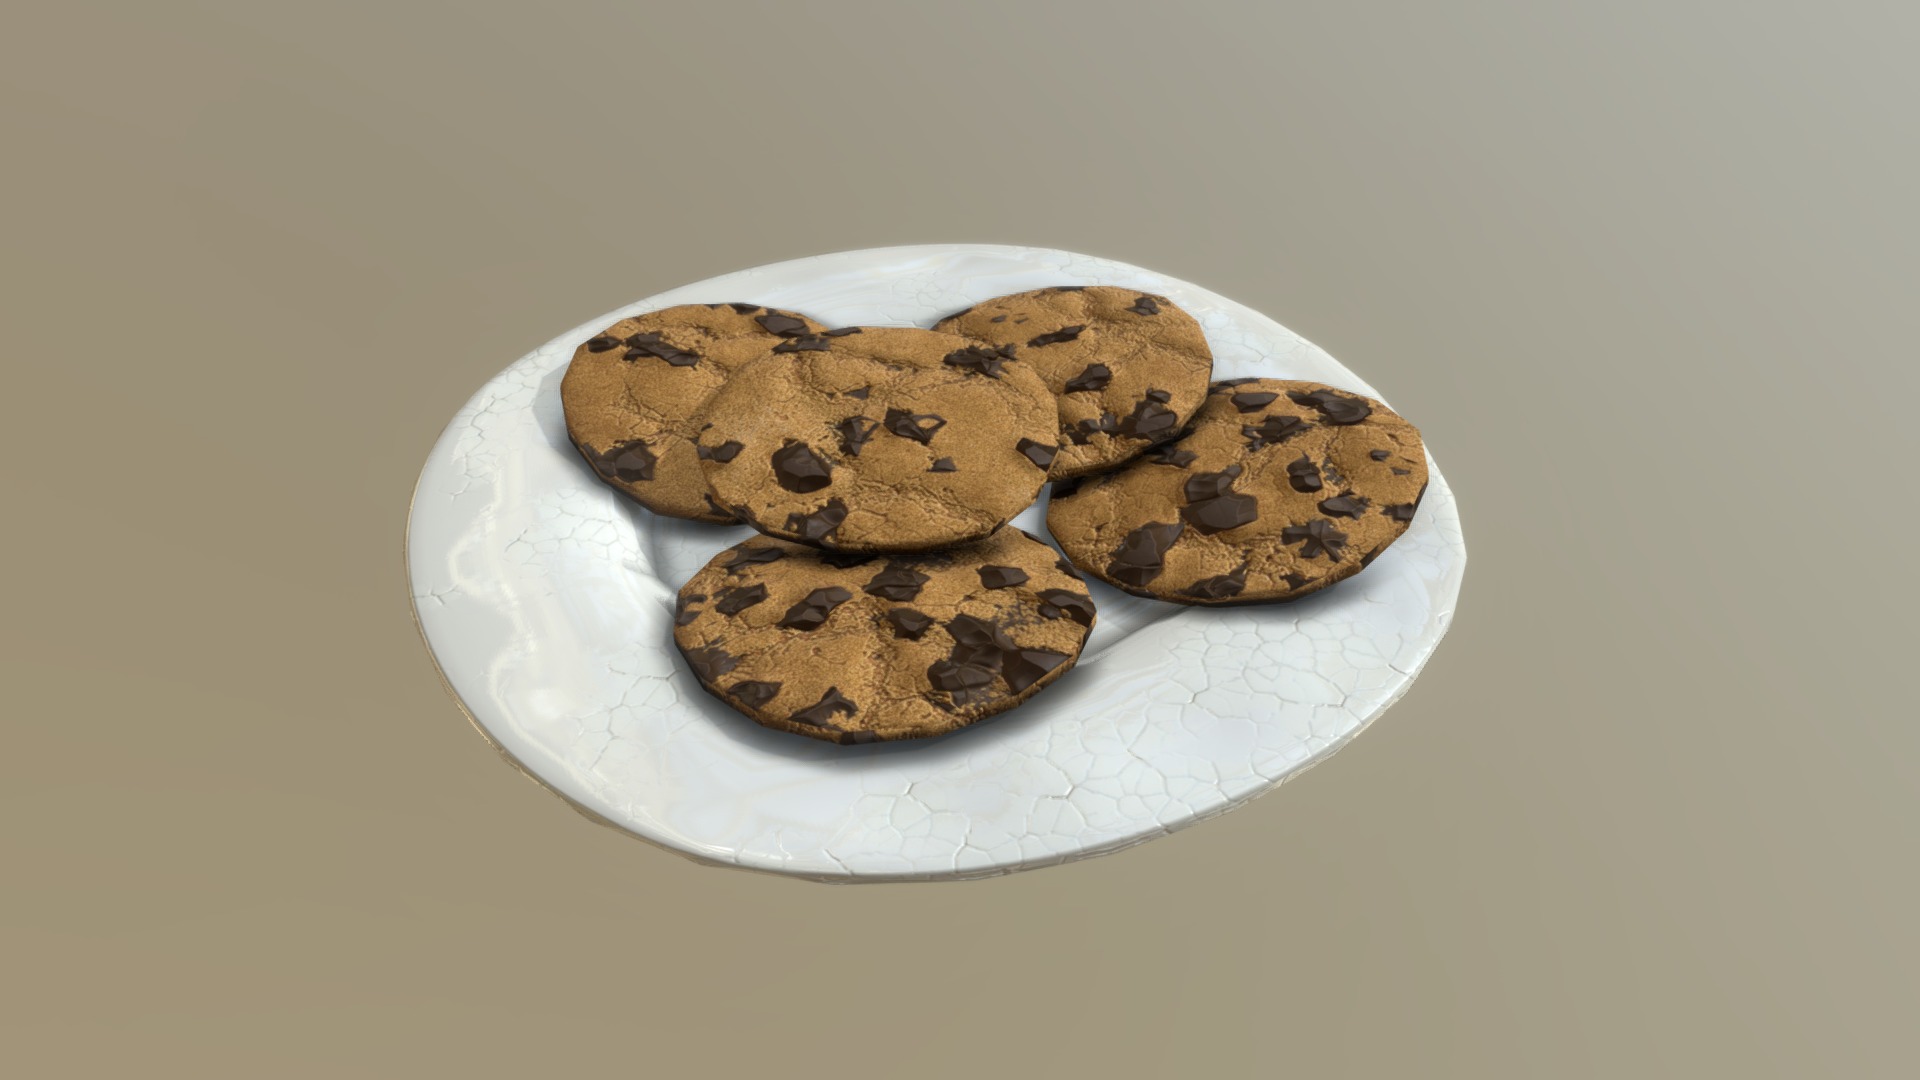 3D model Freshly Baked Cookies - This is a 3D model of the Freshly Baked Cookies. The 3D model is about a plate of chocolate chip cookies.